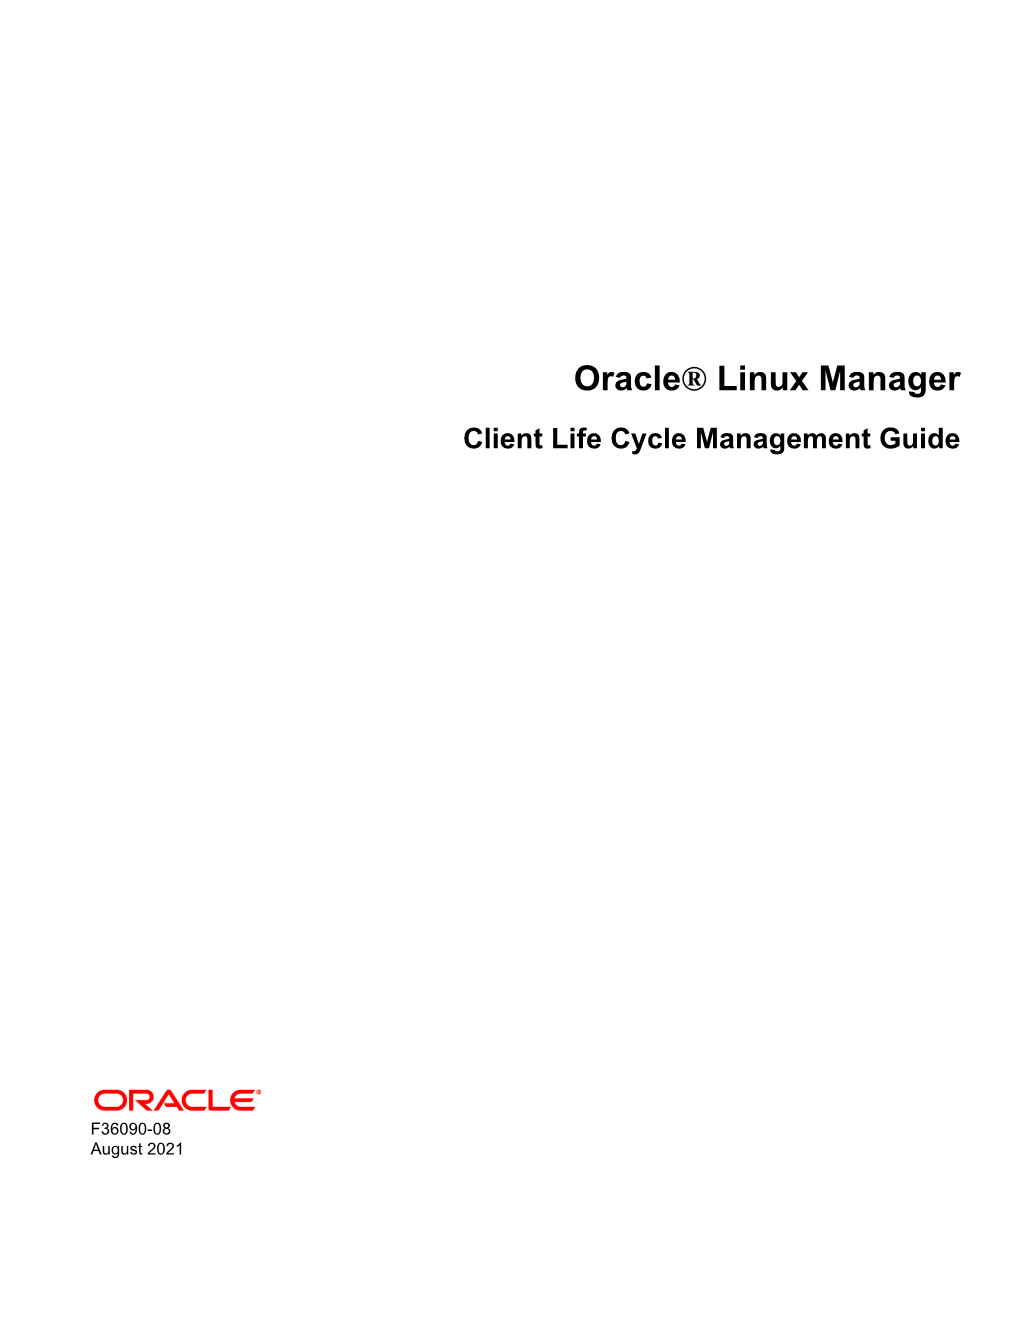 Oracle® Linux Manager Client Life Cycle Management Guide